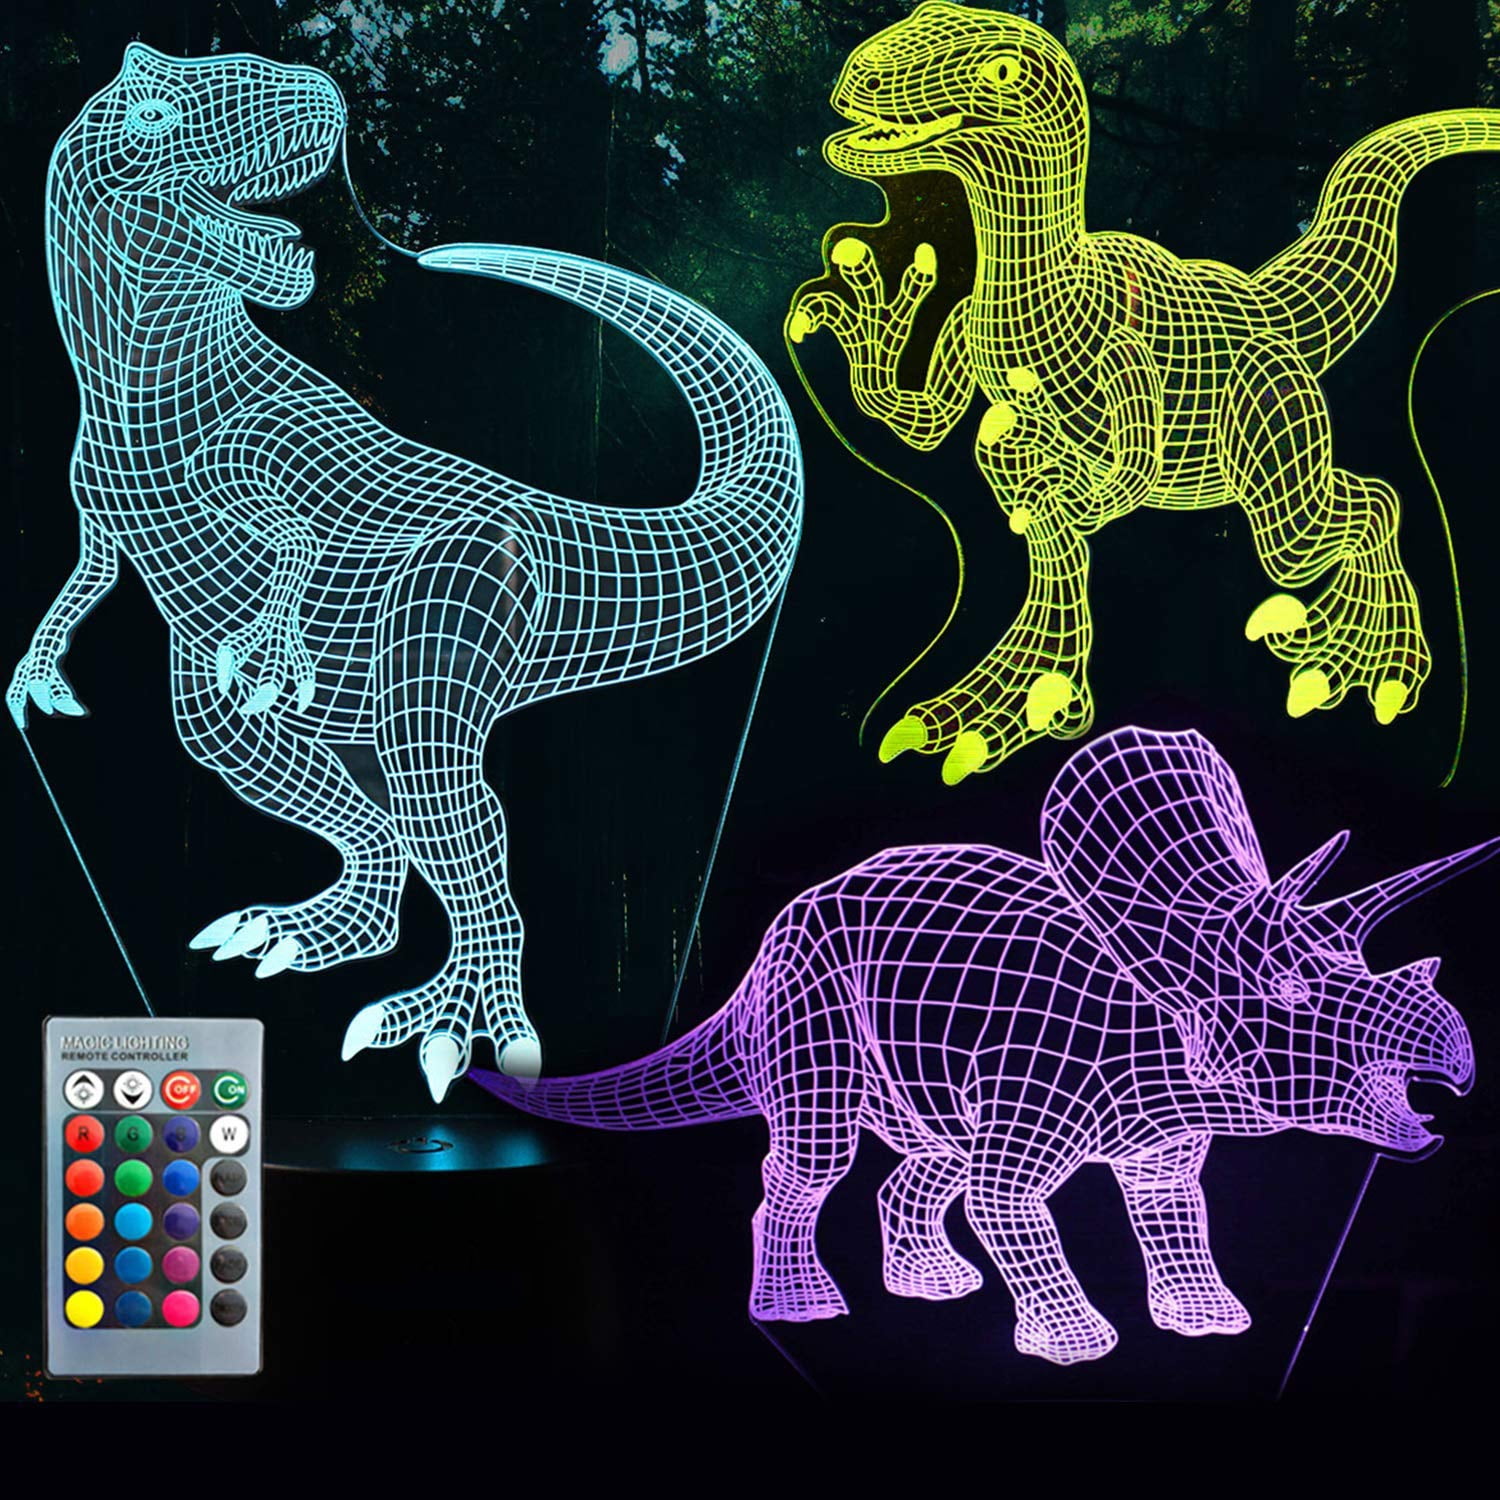 Koyya 3D Dinosaur Night Light Decorative LED Bedside Desk Table Lamp 3D Illusion Light USB Power/7 Colors Changing/Touch Switch for Kids Room Birthday Gifts Toys Boys Child 